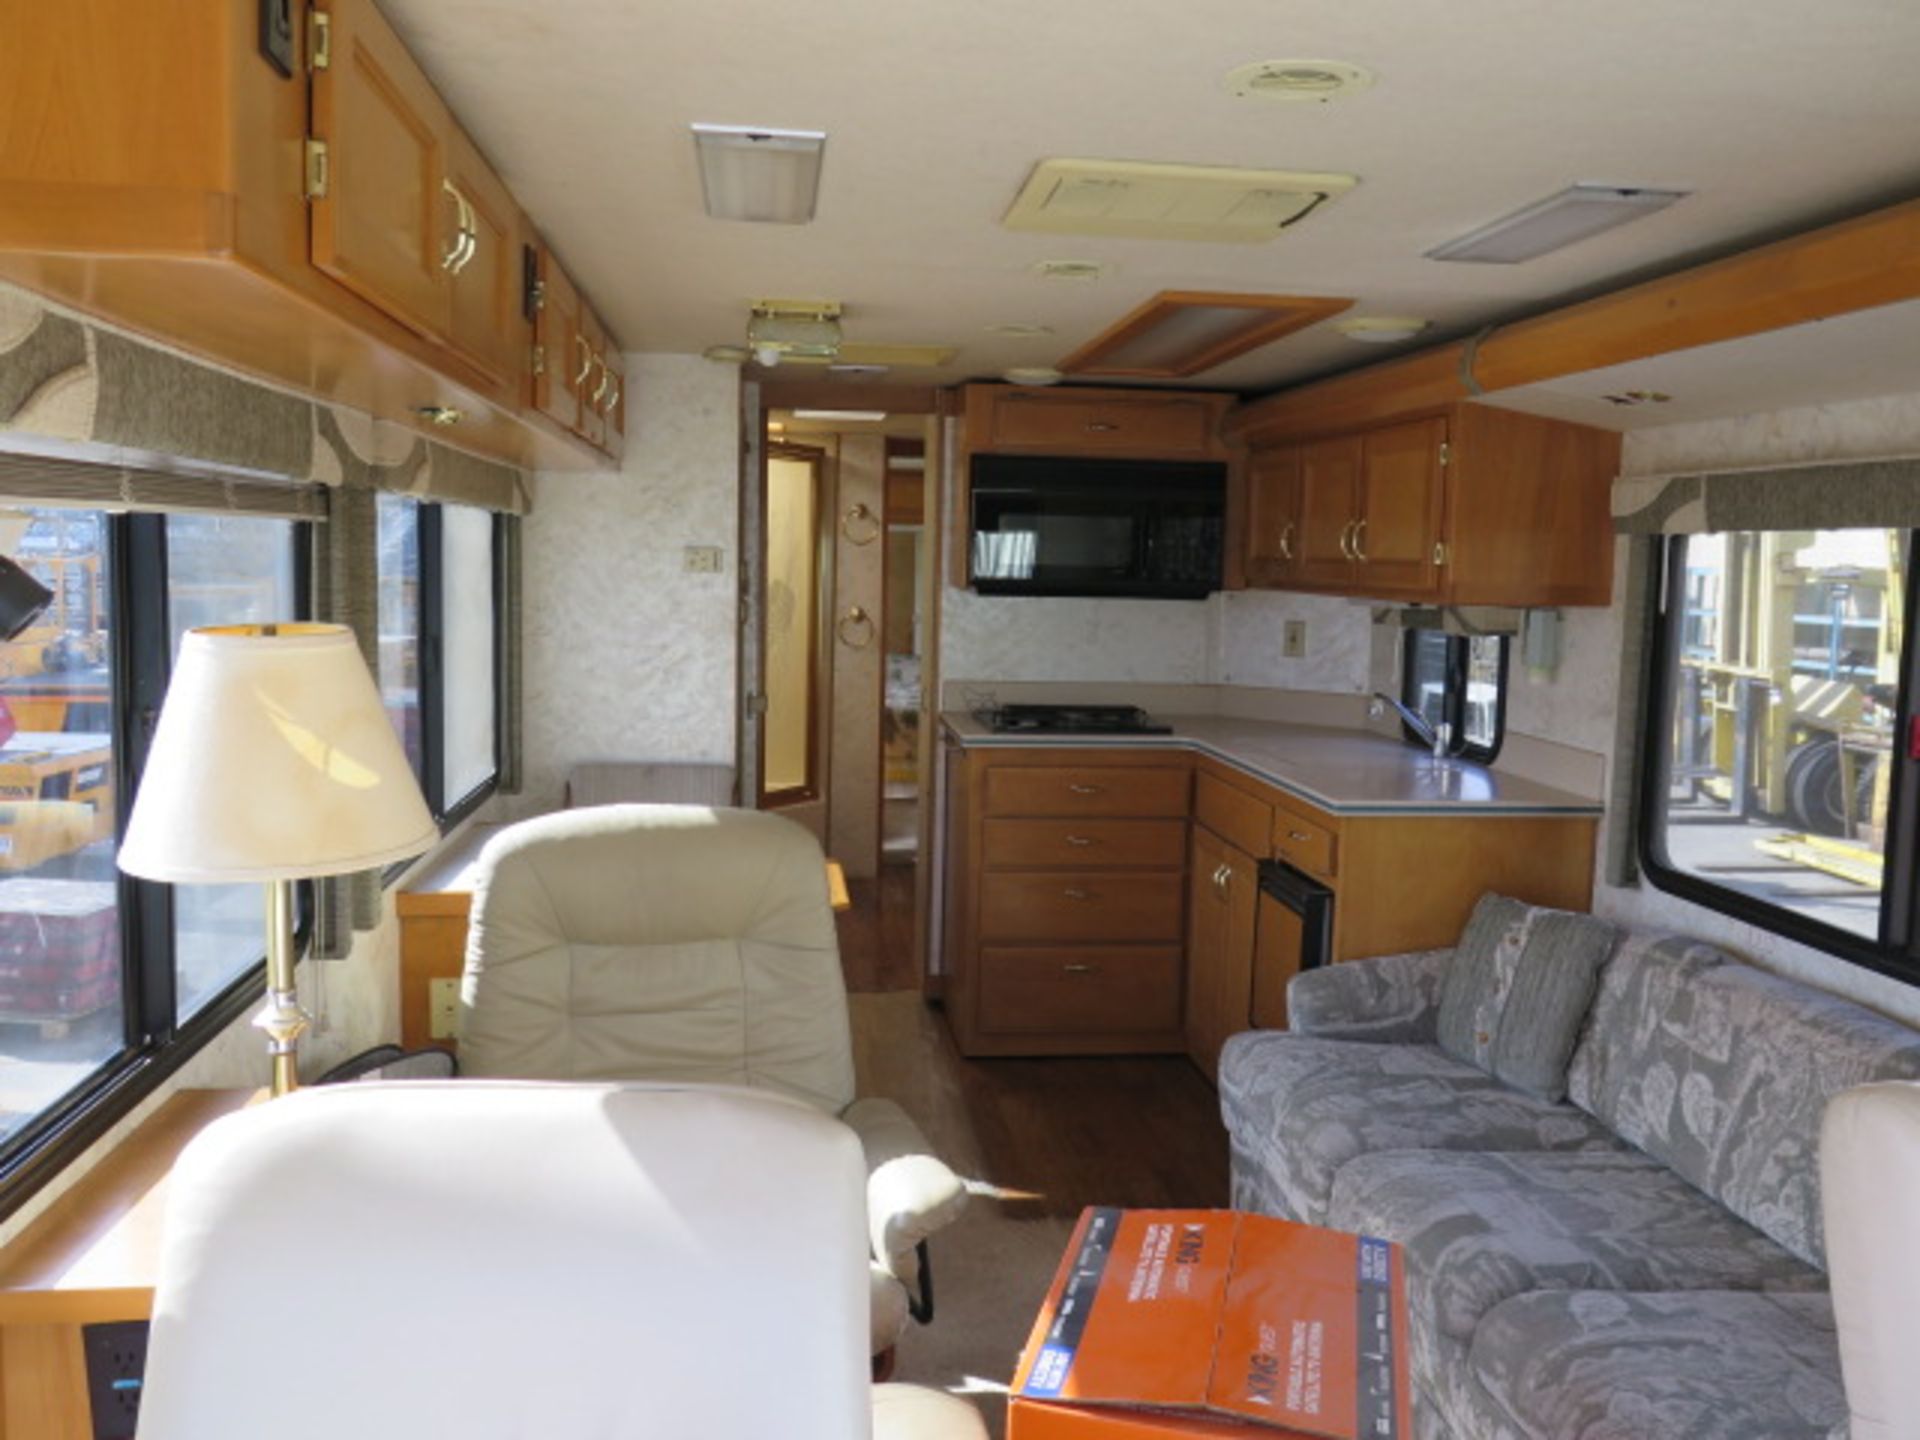 1997 Safari Motor Coacher Motor Home Lisc# 5PEJ100 w/ CAT Diesel Engine, Automatic Trans, SOLD AS IS - Image 22 of 54